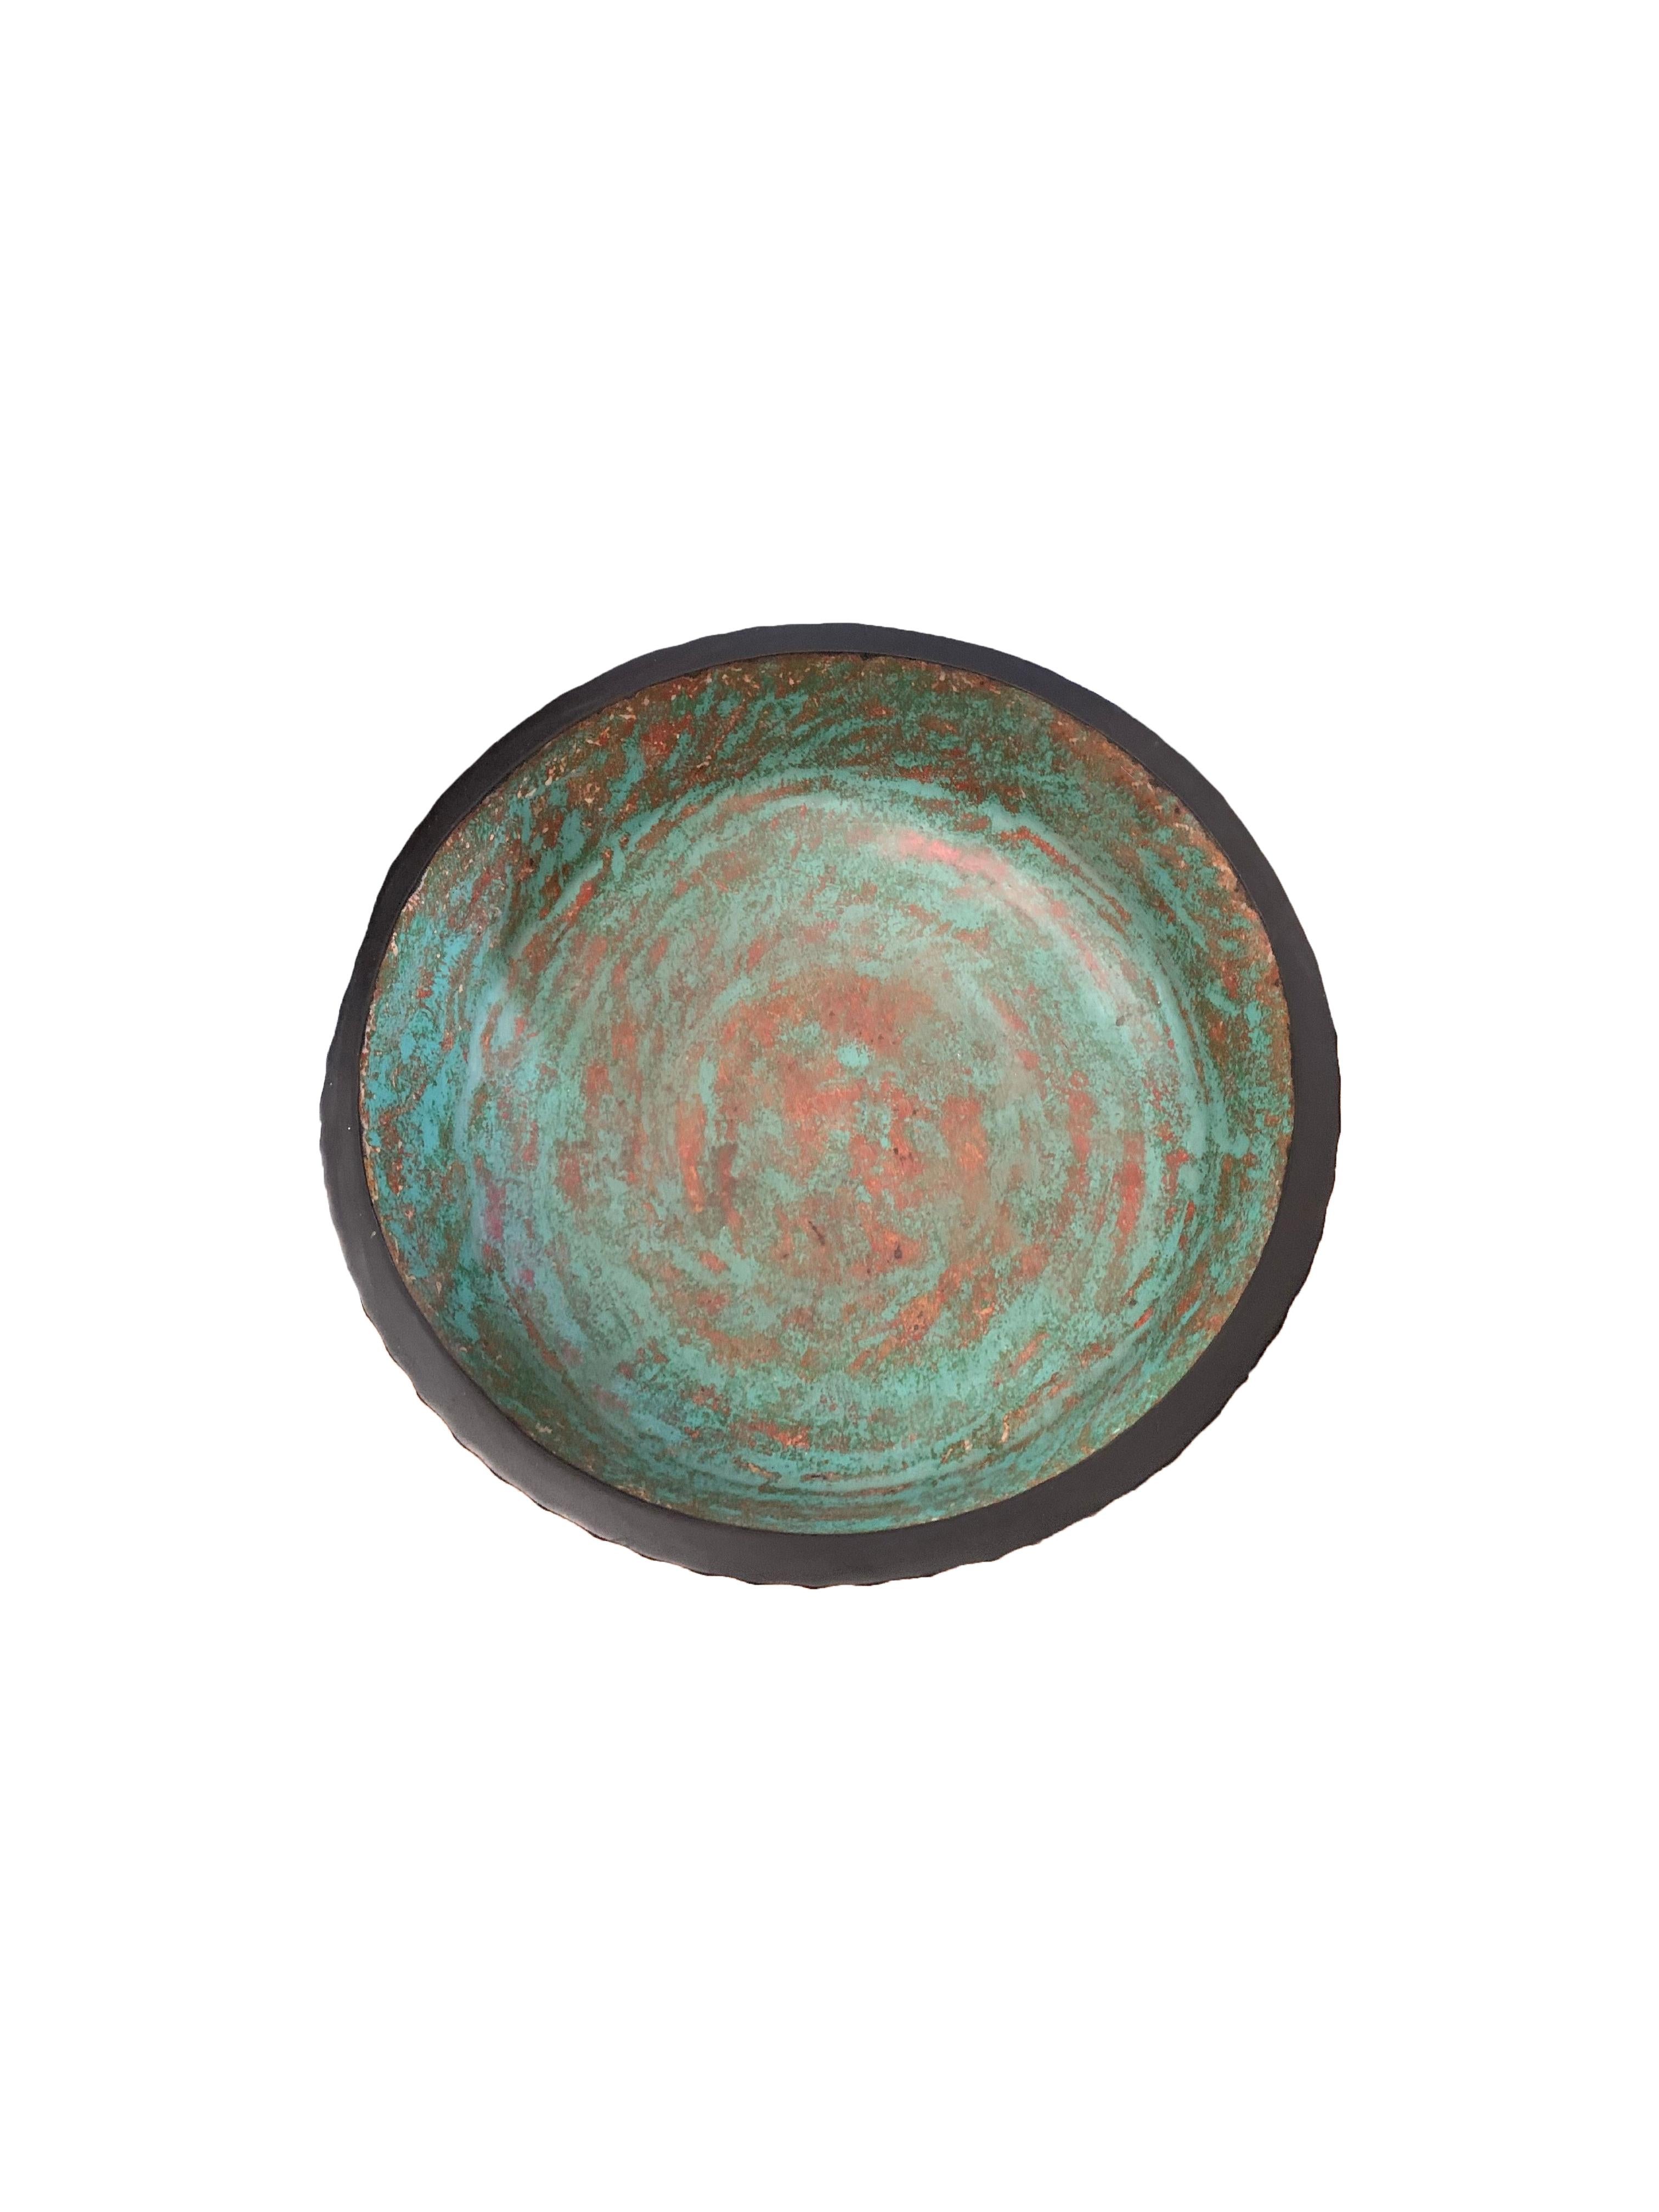 Carved Solid Mango Wood Bowl with Turquoise & Black Finish